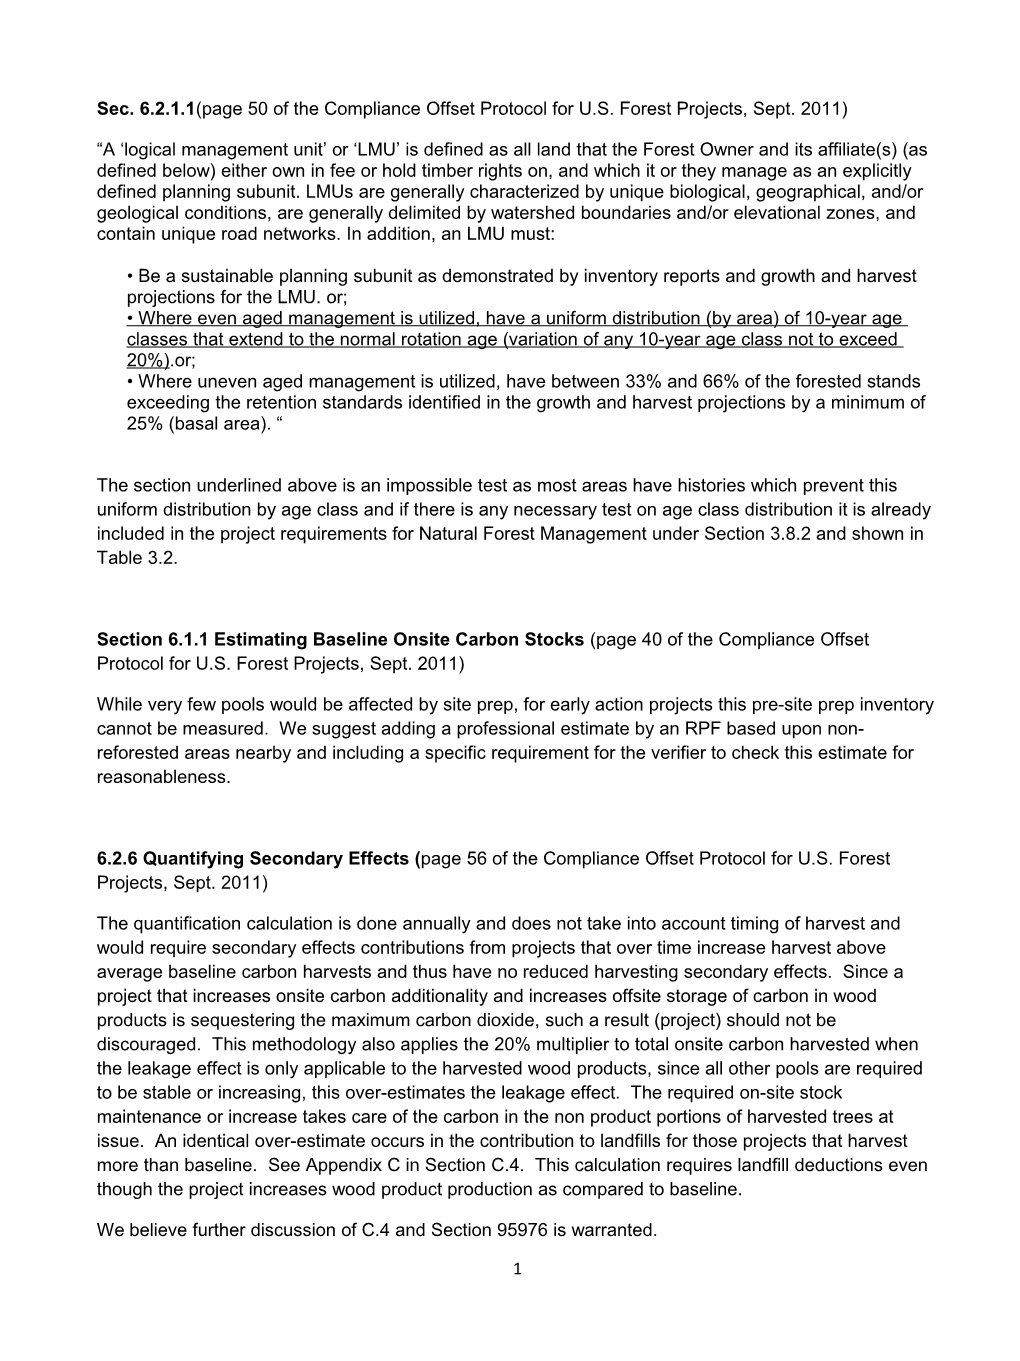 Sec. 6.2.1.1(Page 50 of the Compliance Offset Protocol for U.S. Forest Projects, Sept. 2011)